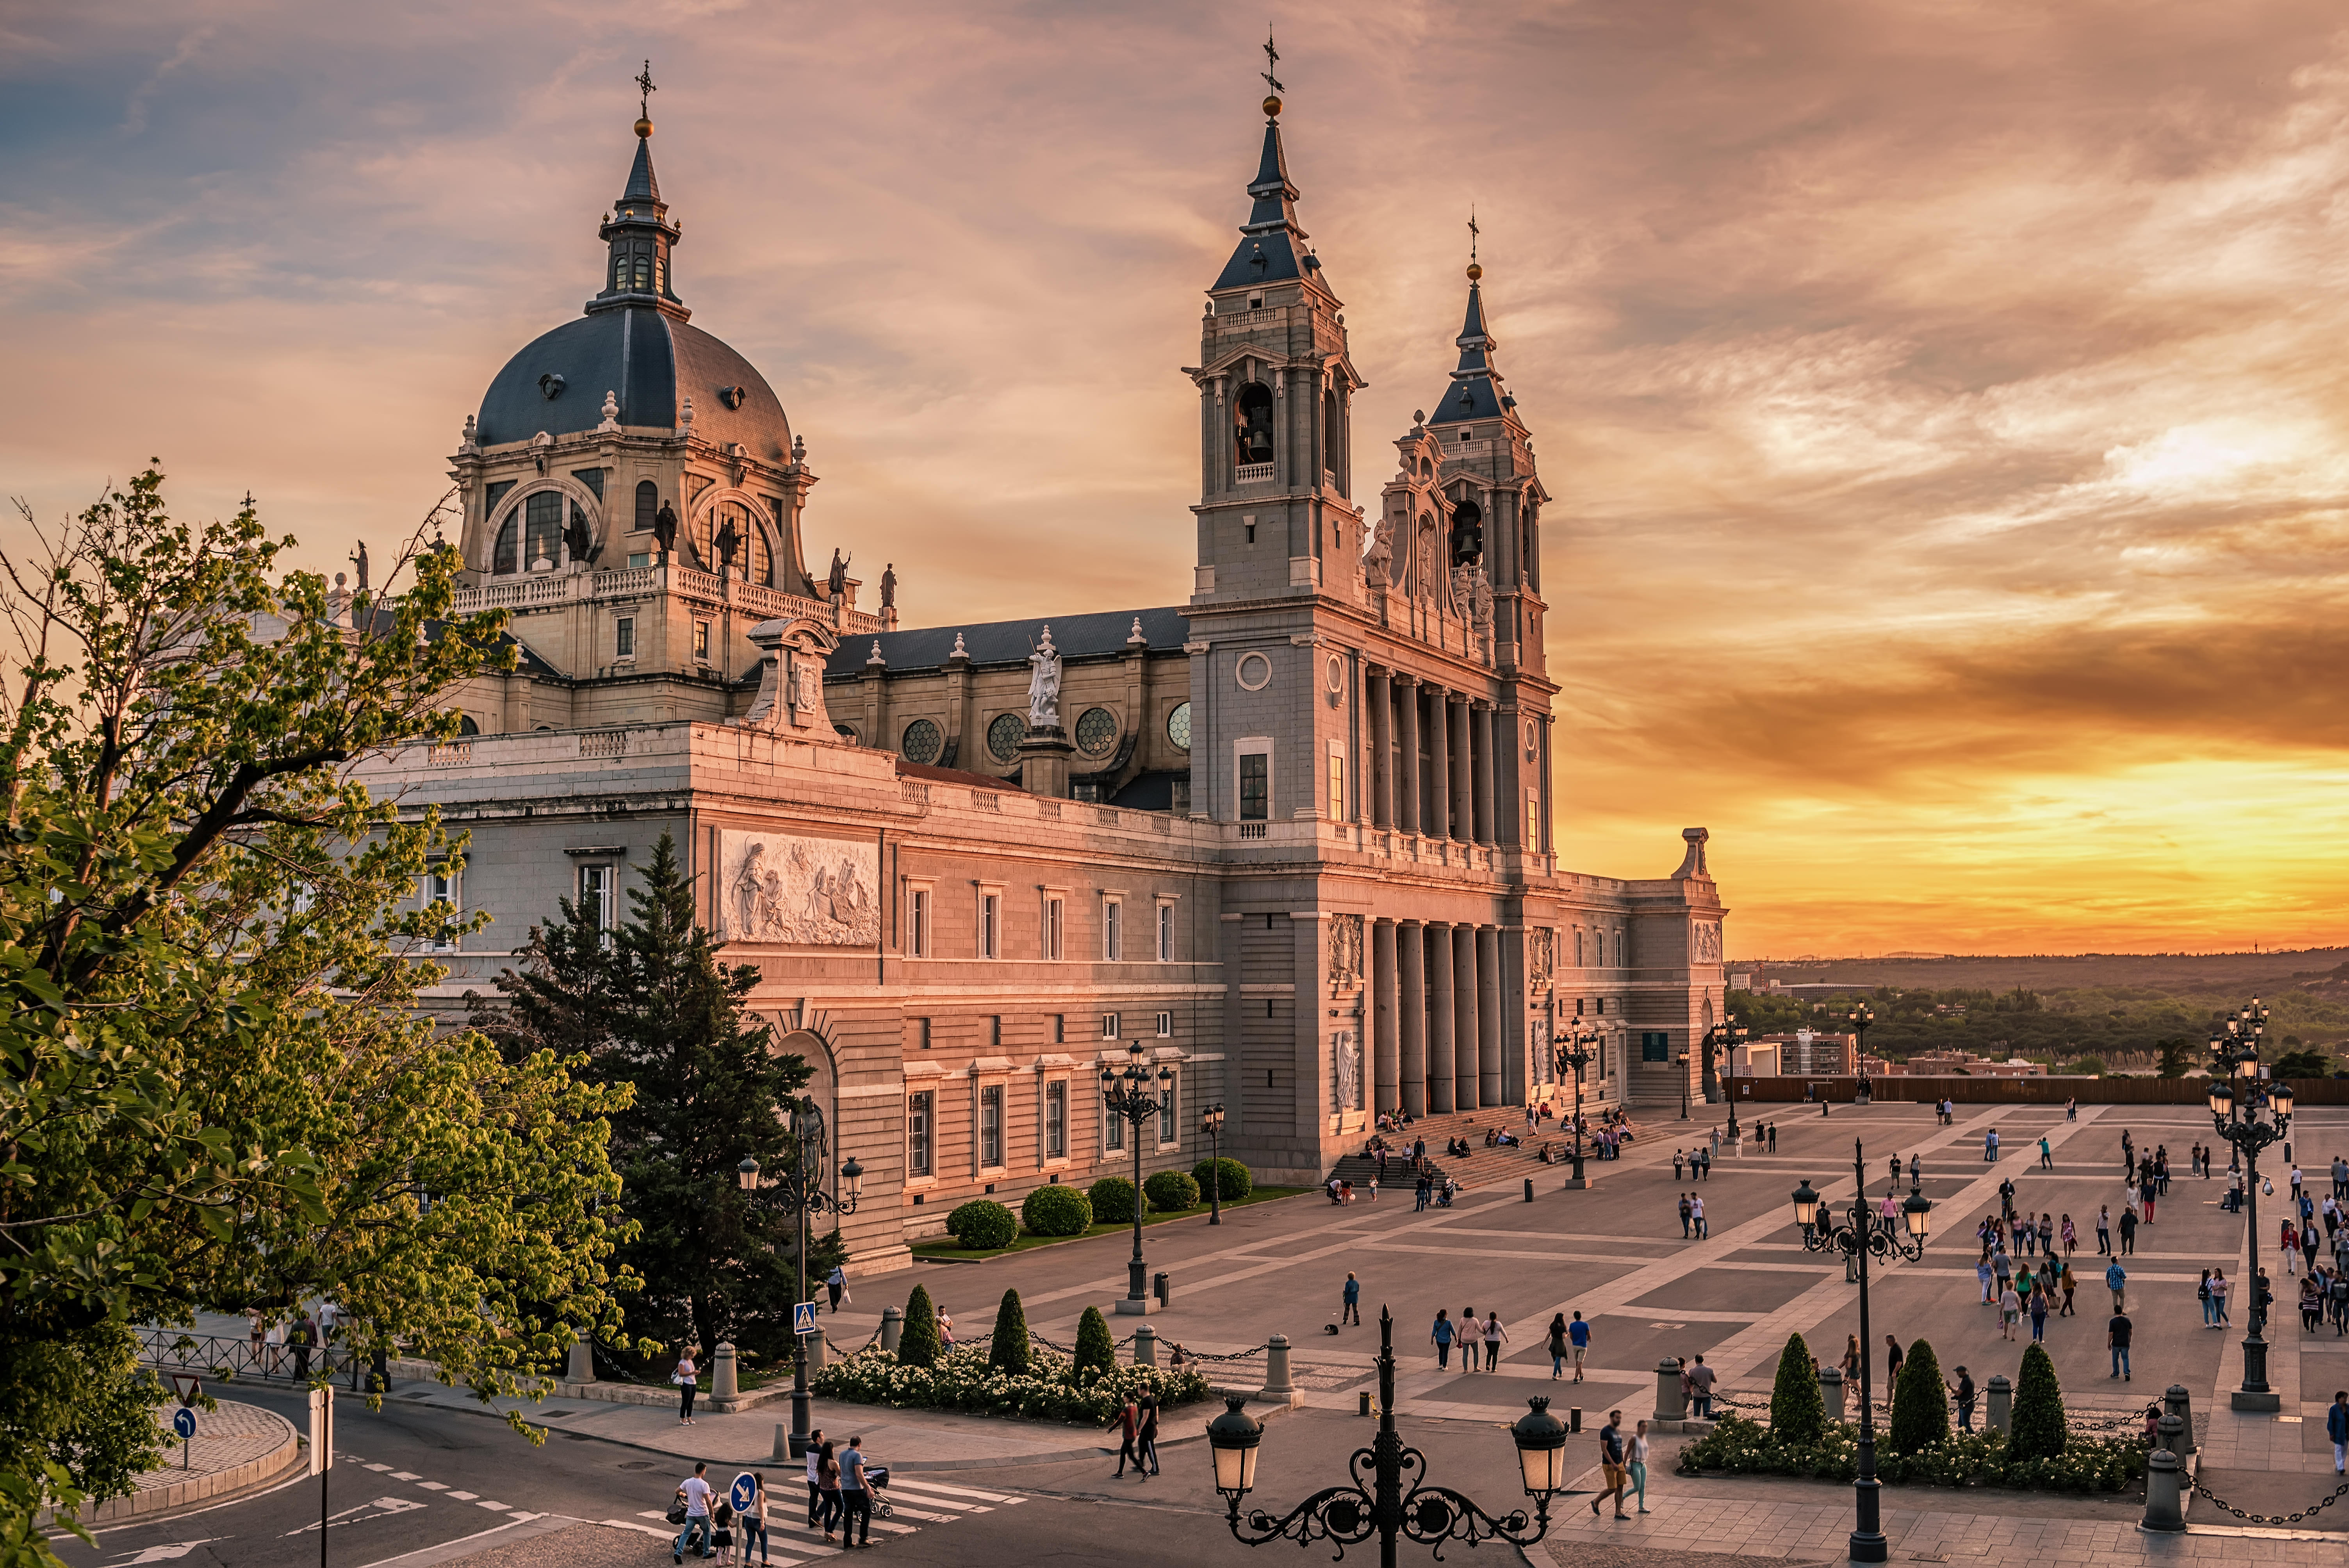 Almudena Cathedral near Royal Palace of Madrid